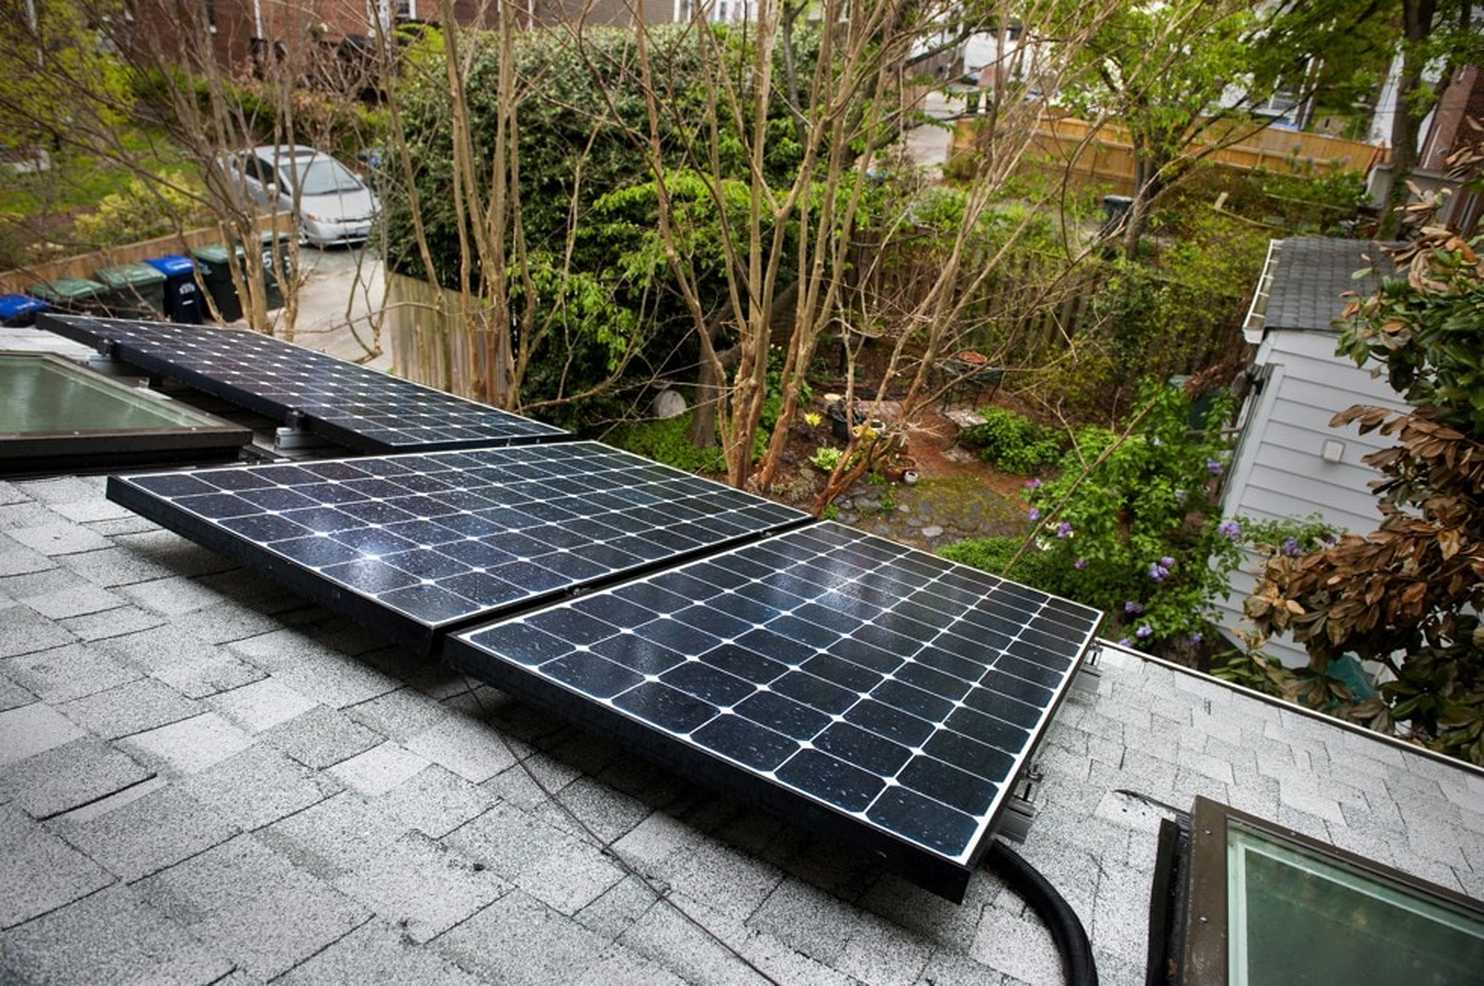 Benefits of solar panels clear after two years